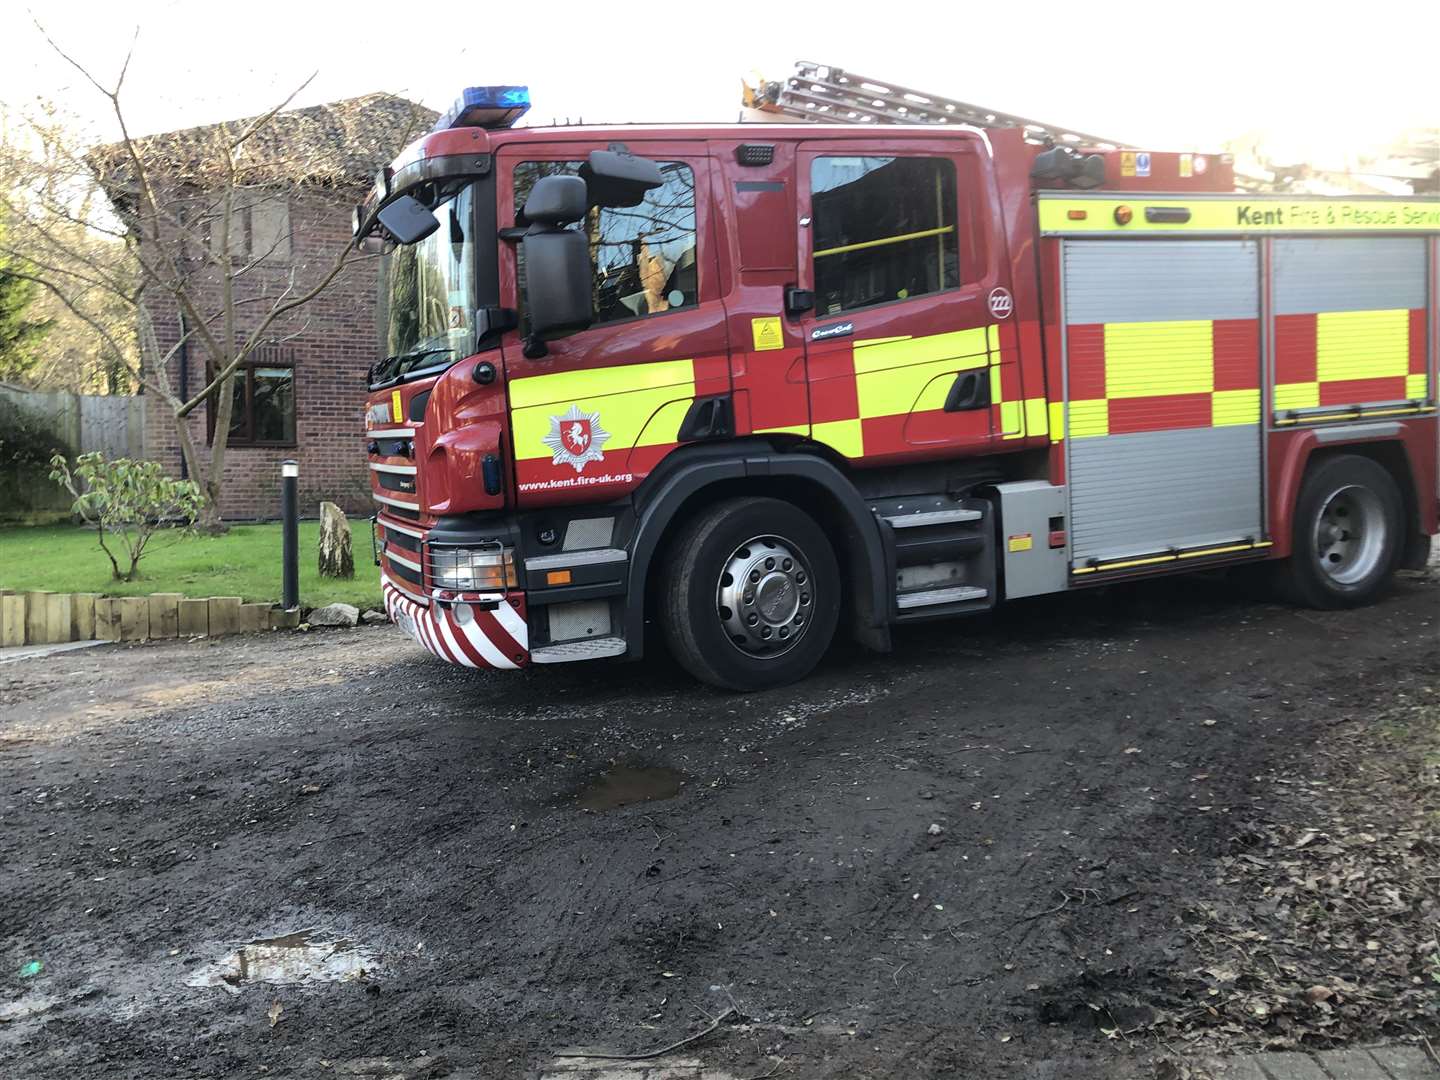 The fire service was at the house the next day